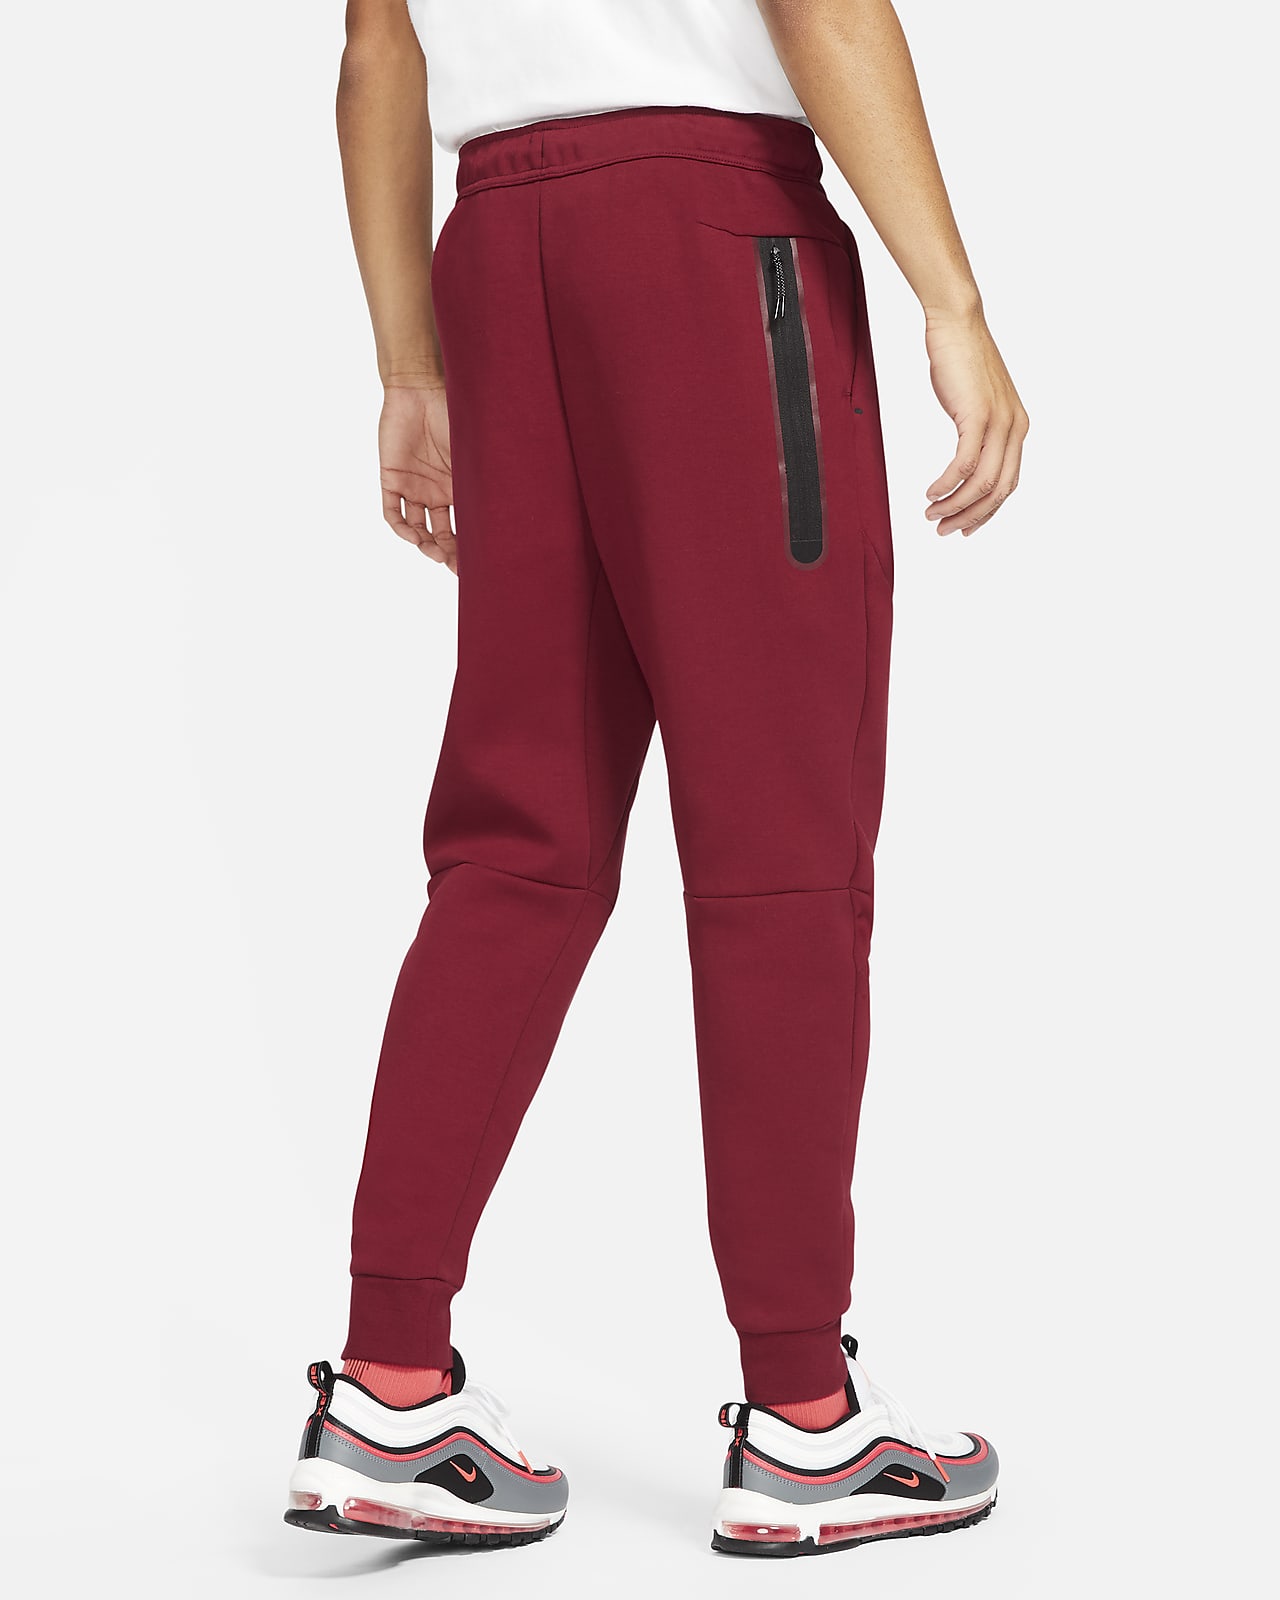 red and blue nike joggers